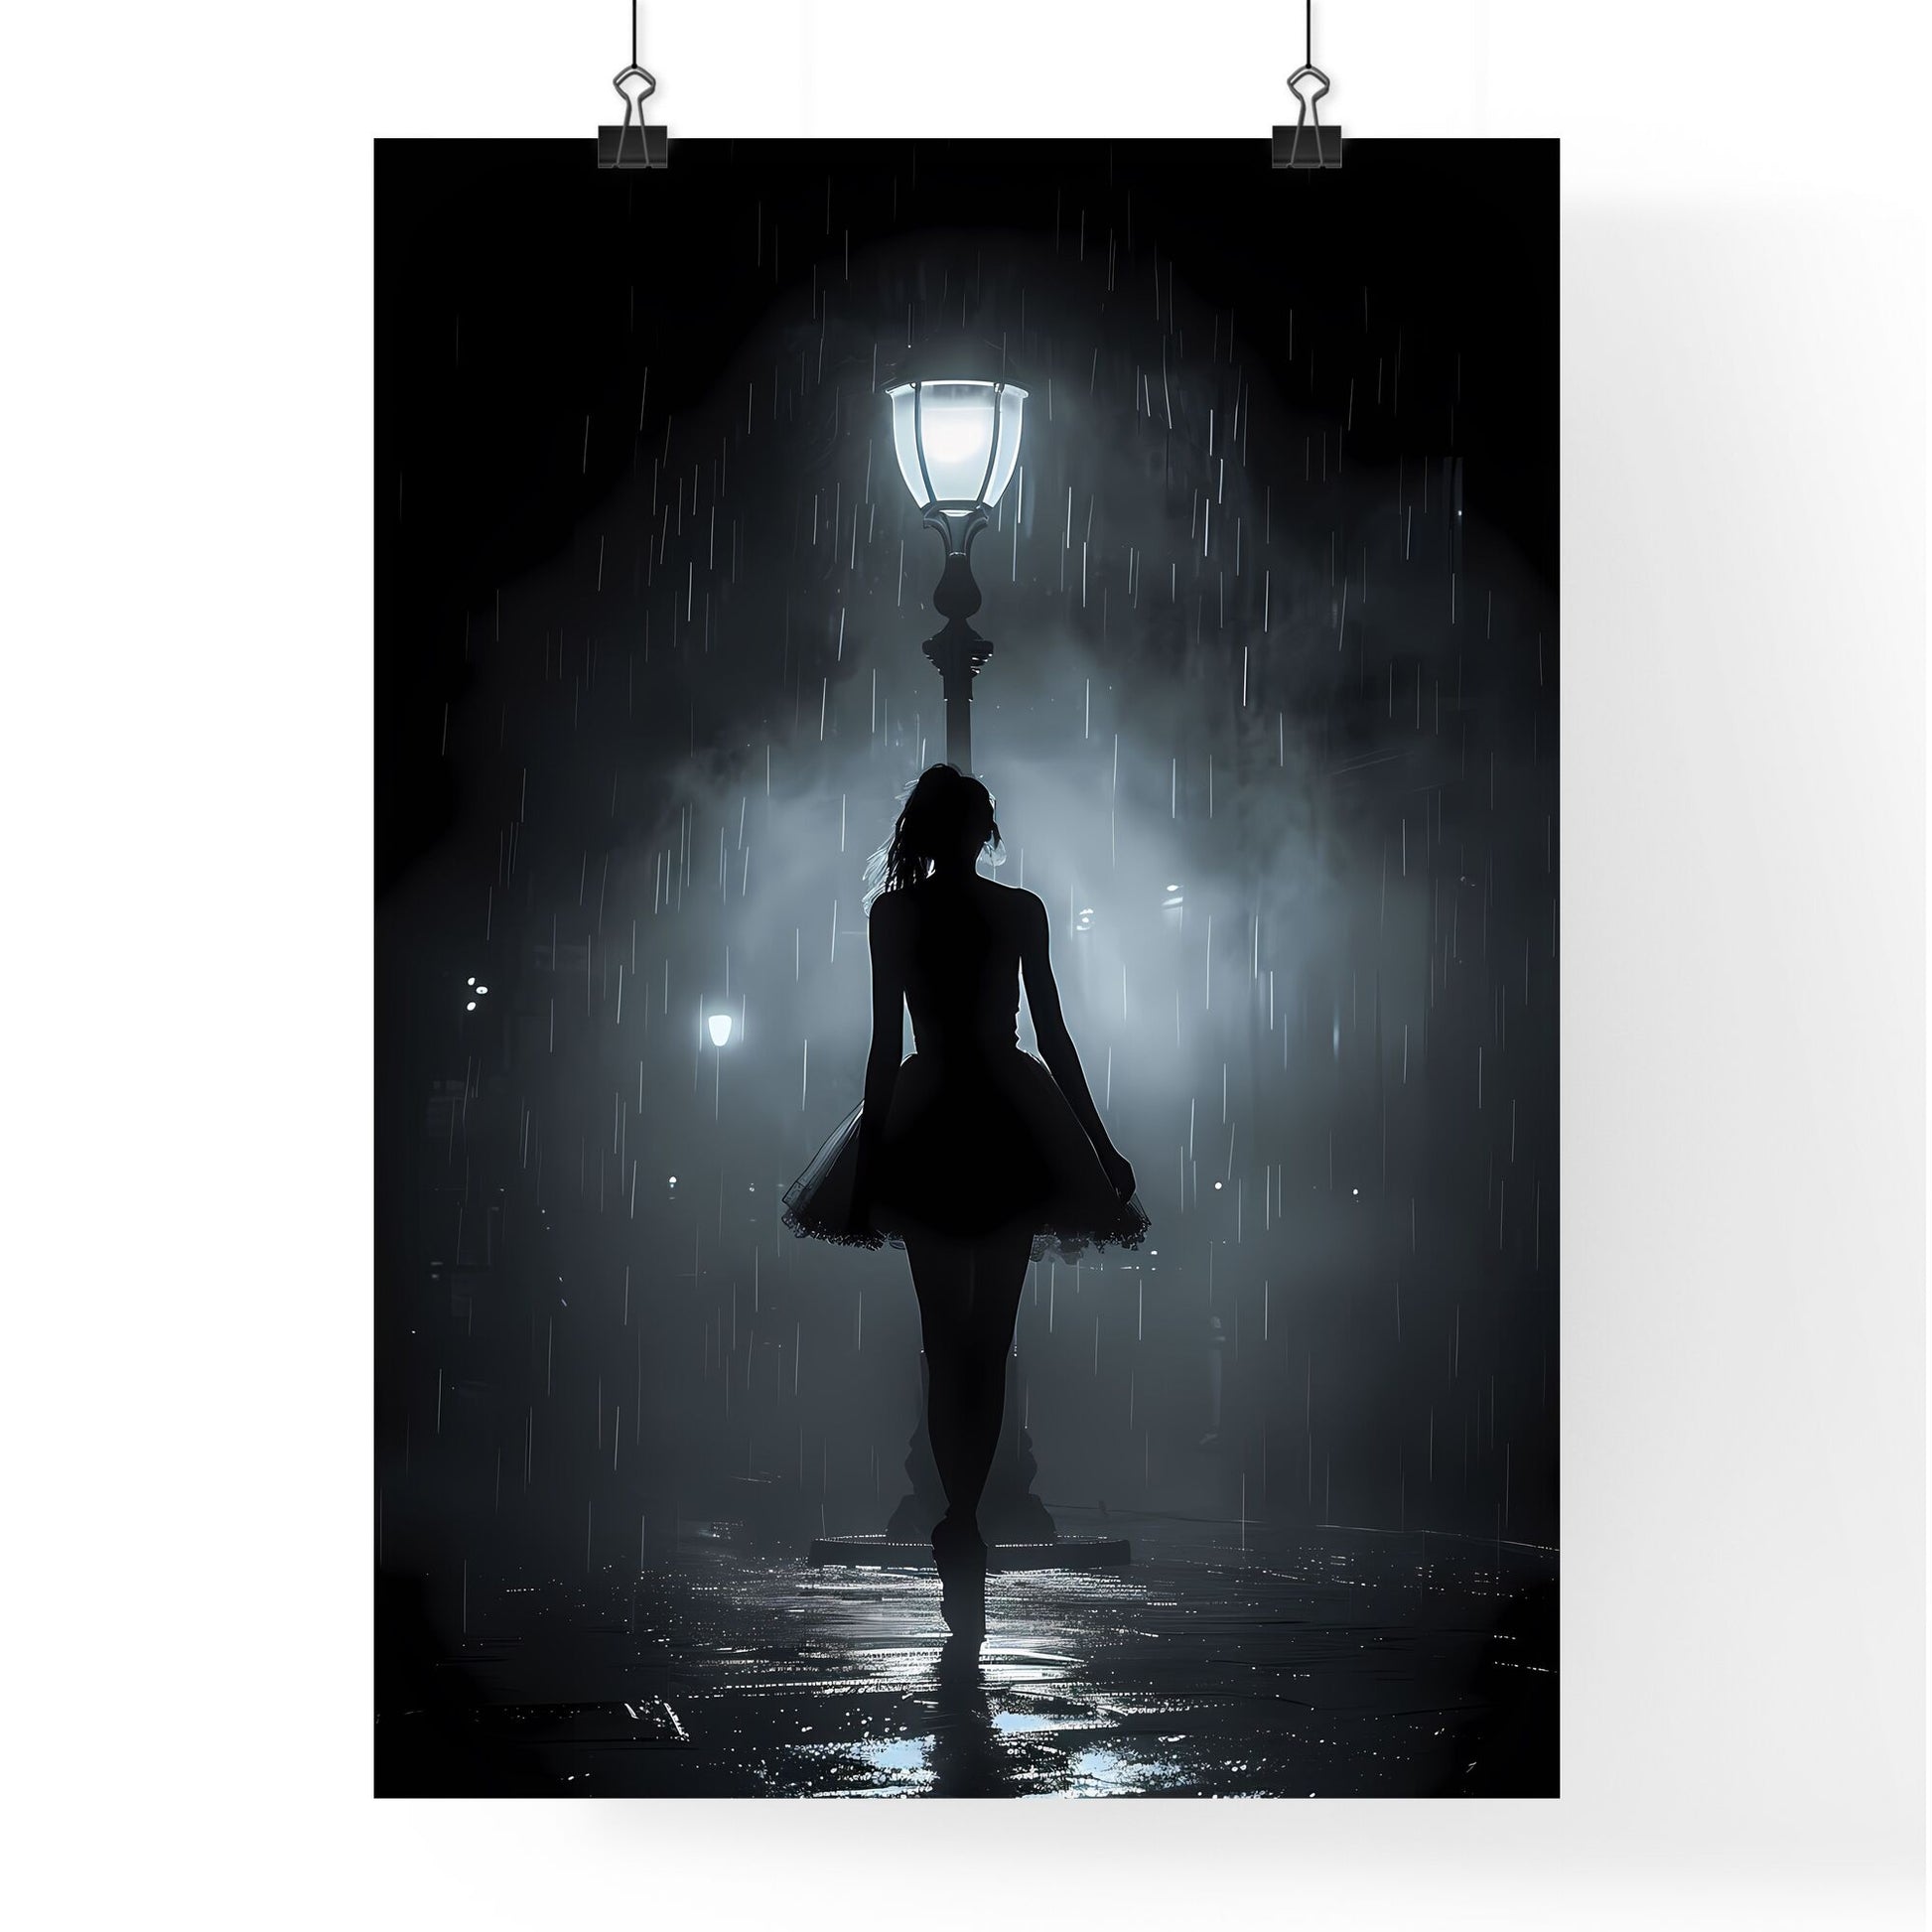 Dancing in Darkness: A Single Light Illuminates a Ballet Silhouette Amidst Vibrant Painting Default Title